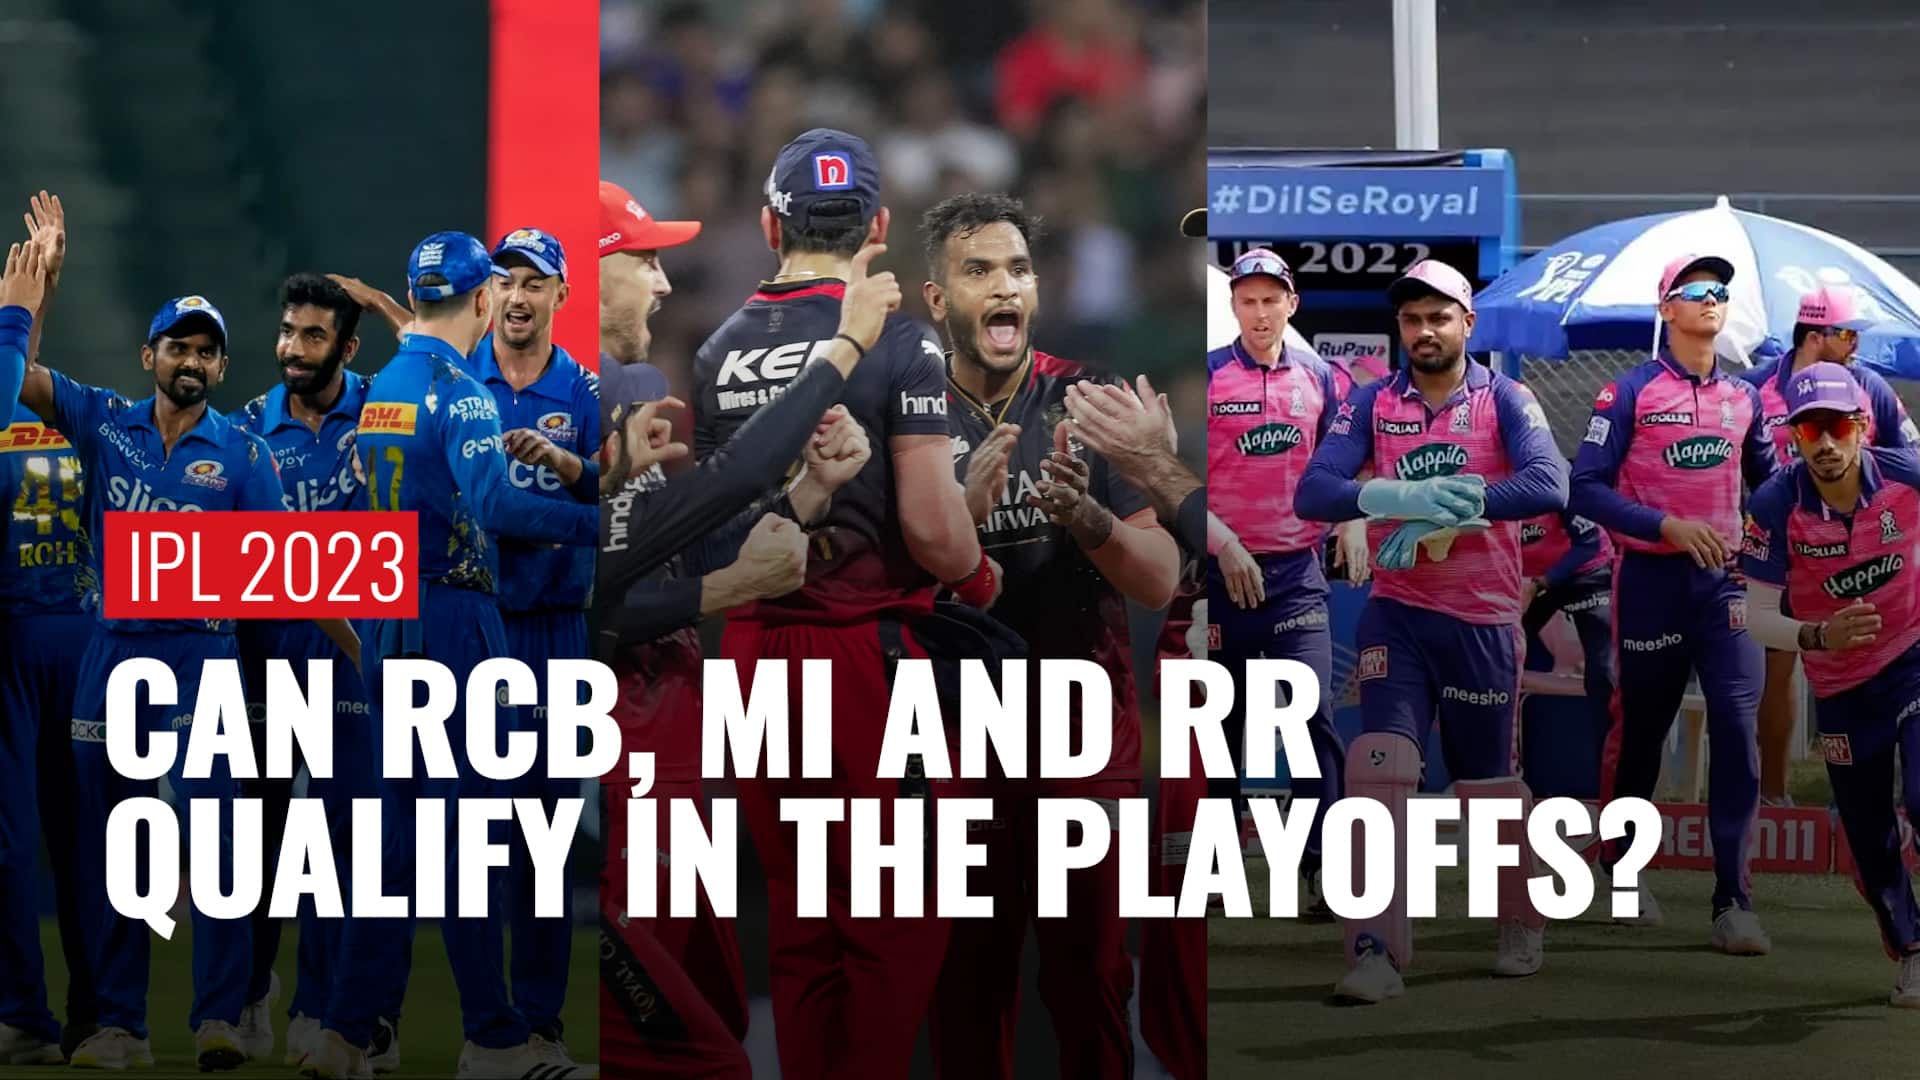 IPL 2023 Playoffs How Can RCB, MI And RR Qualify in the Playoffs